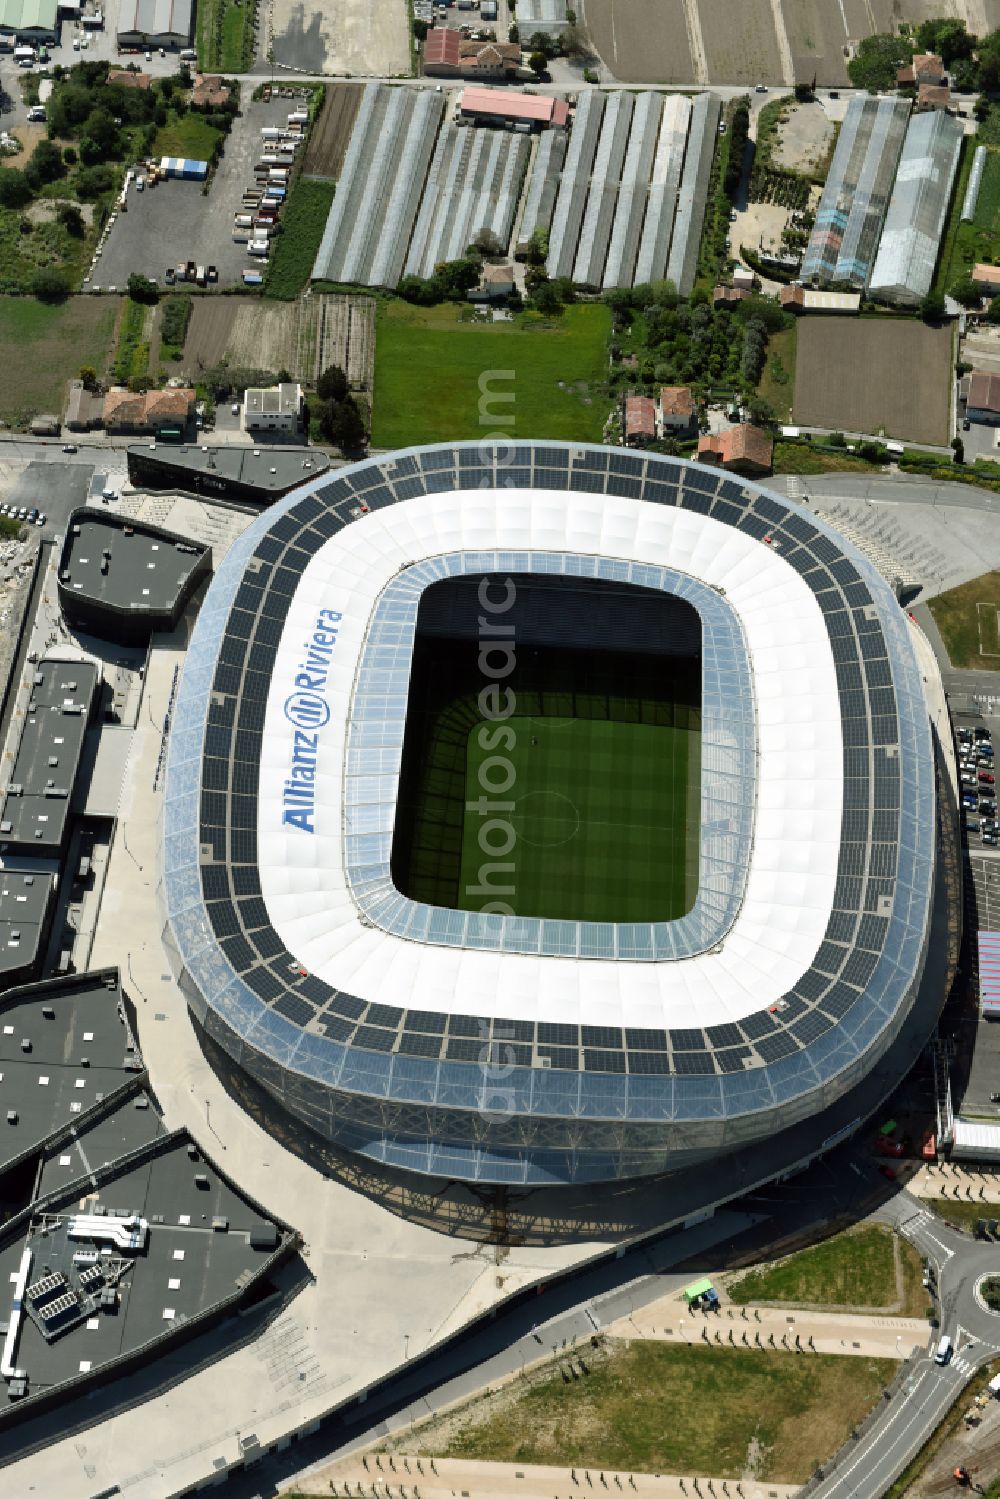 Nizza from the bird's eye view: Sports facility grounds of the Arena stadium Allianz Riviera Bd. des Jardiniers in Nice in Provence-Alpes-Cote d'Azur, France